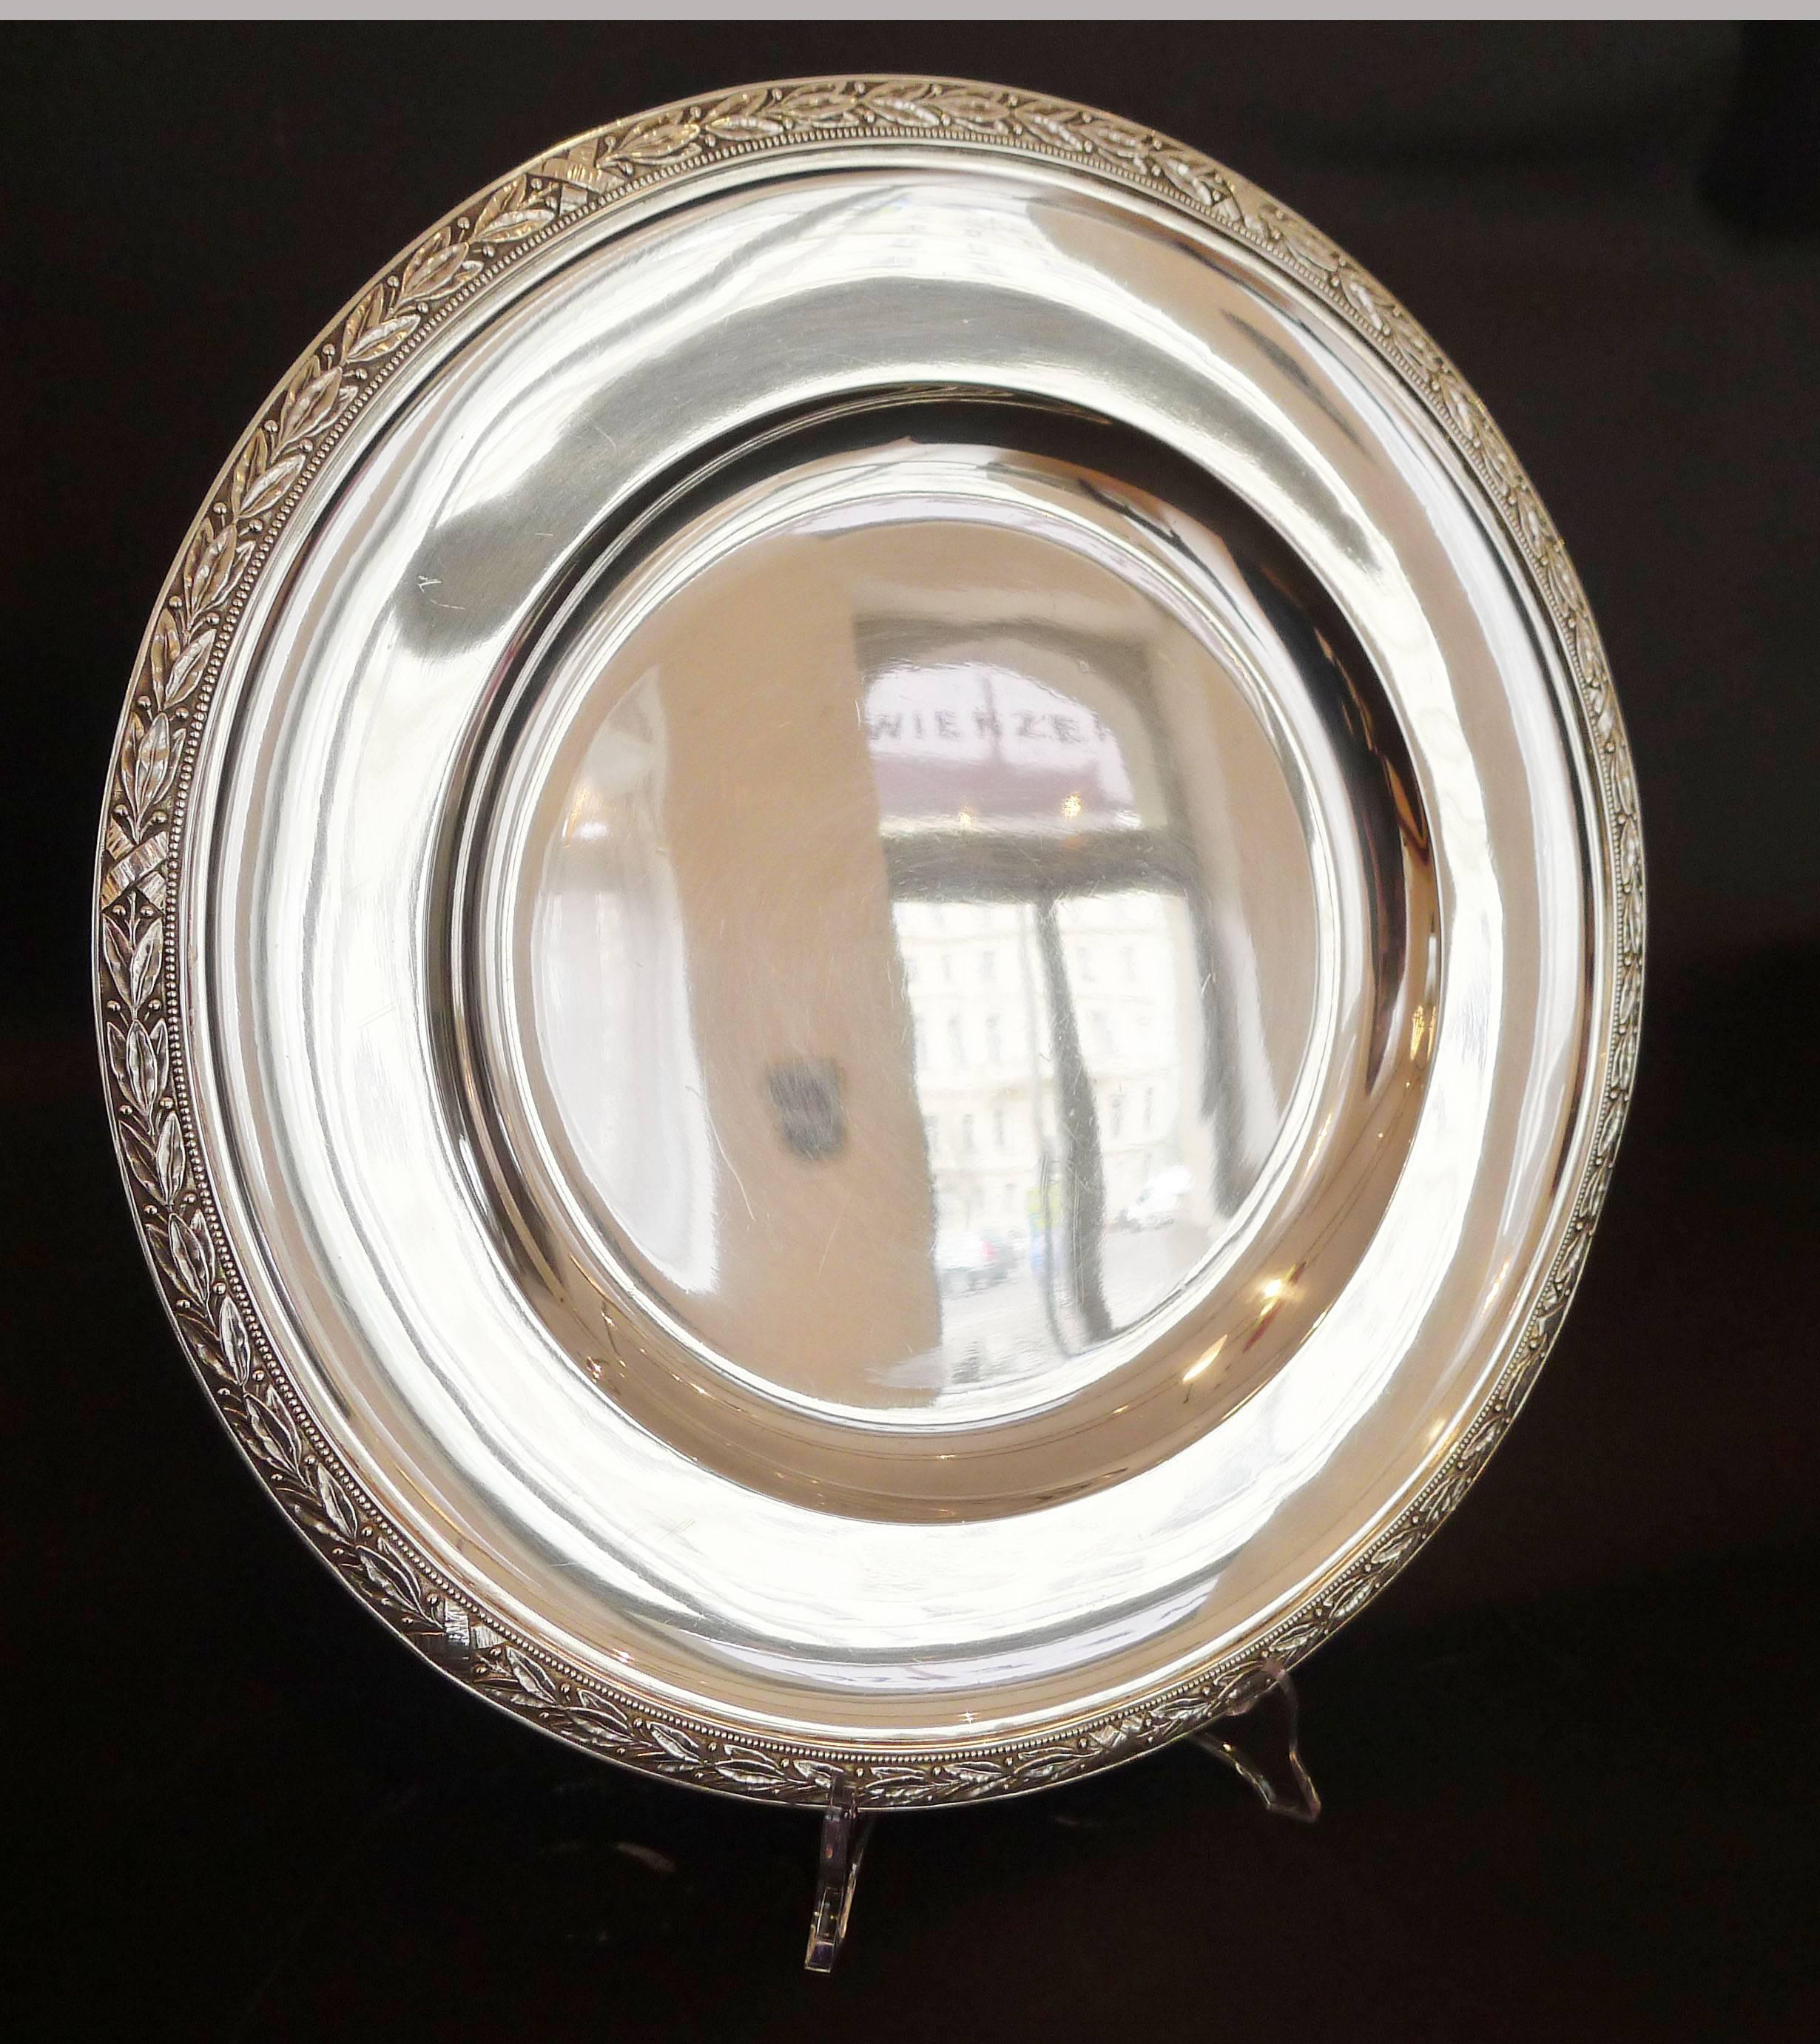 Beautiful silver plate with floral decoration on the edge made by famous Austrian designer Joseph C. Klinkosch who is well-known for his timeless and elegant designs as well as highest craftsmanship.